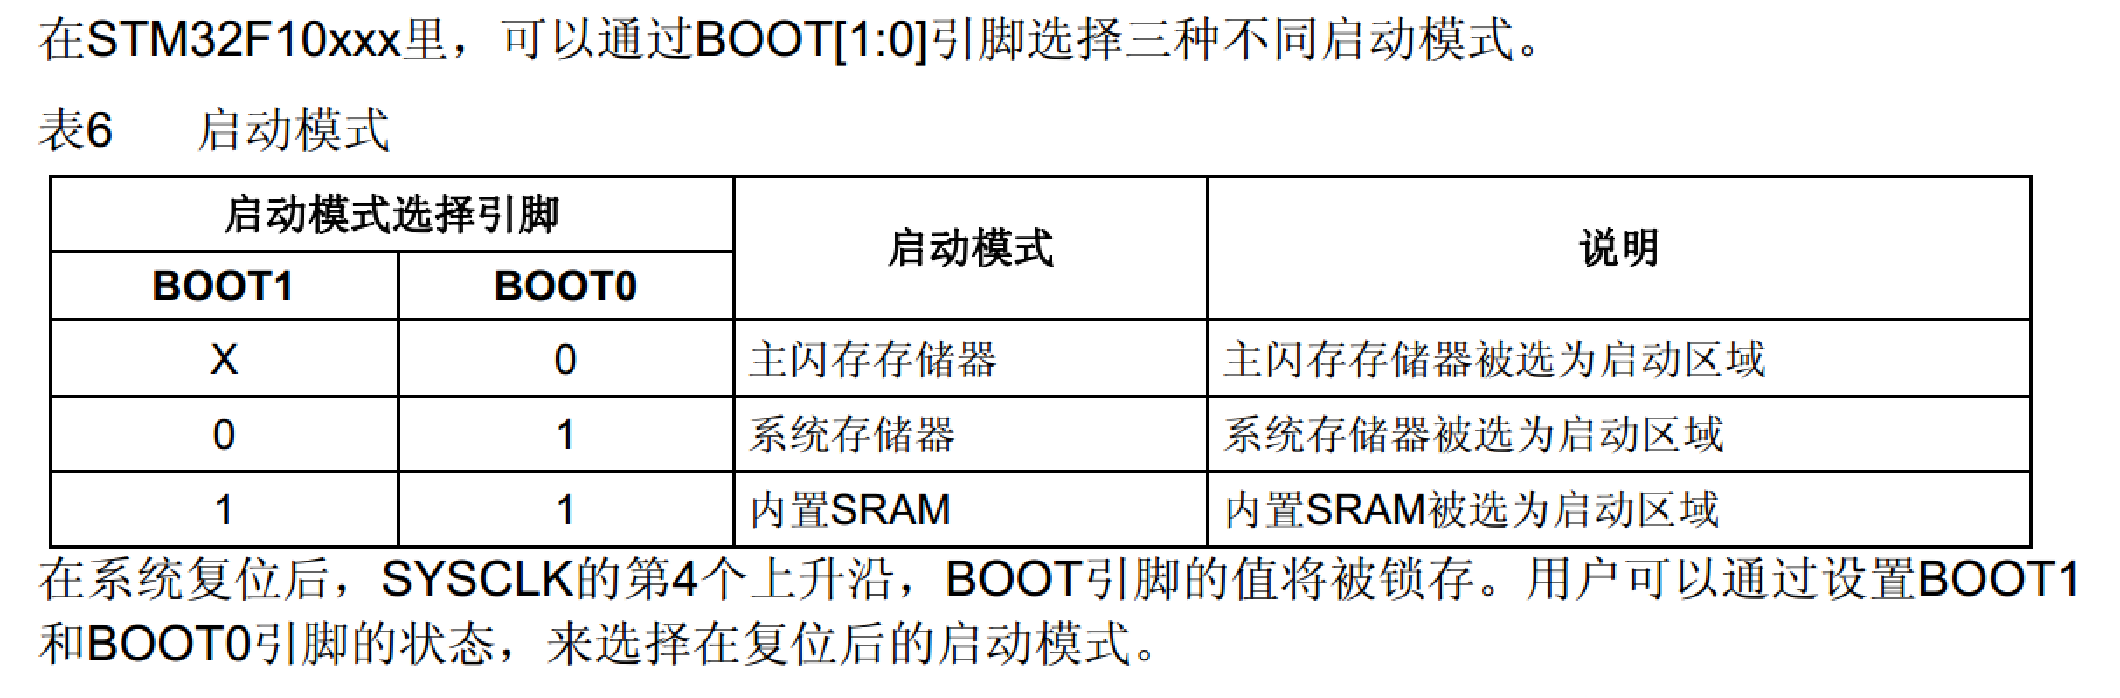 P2-STM32简介-34.png